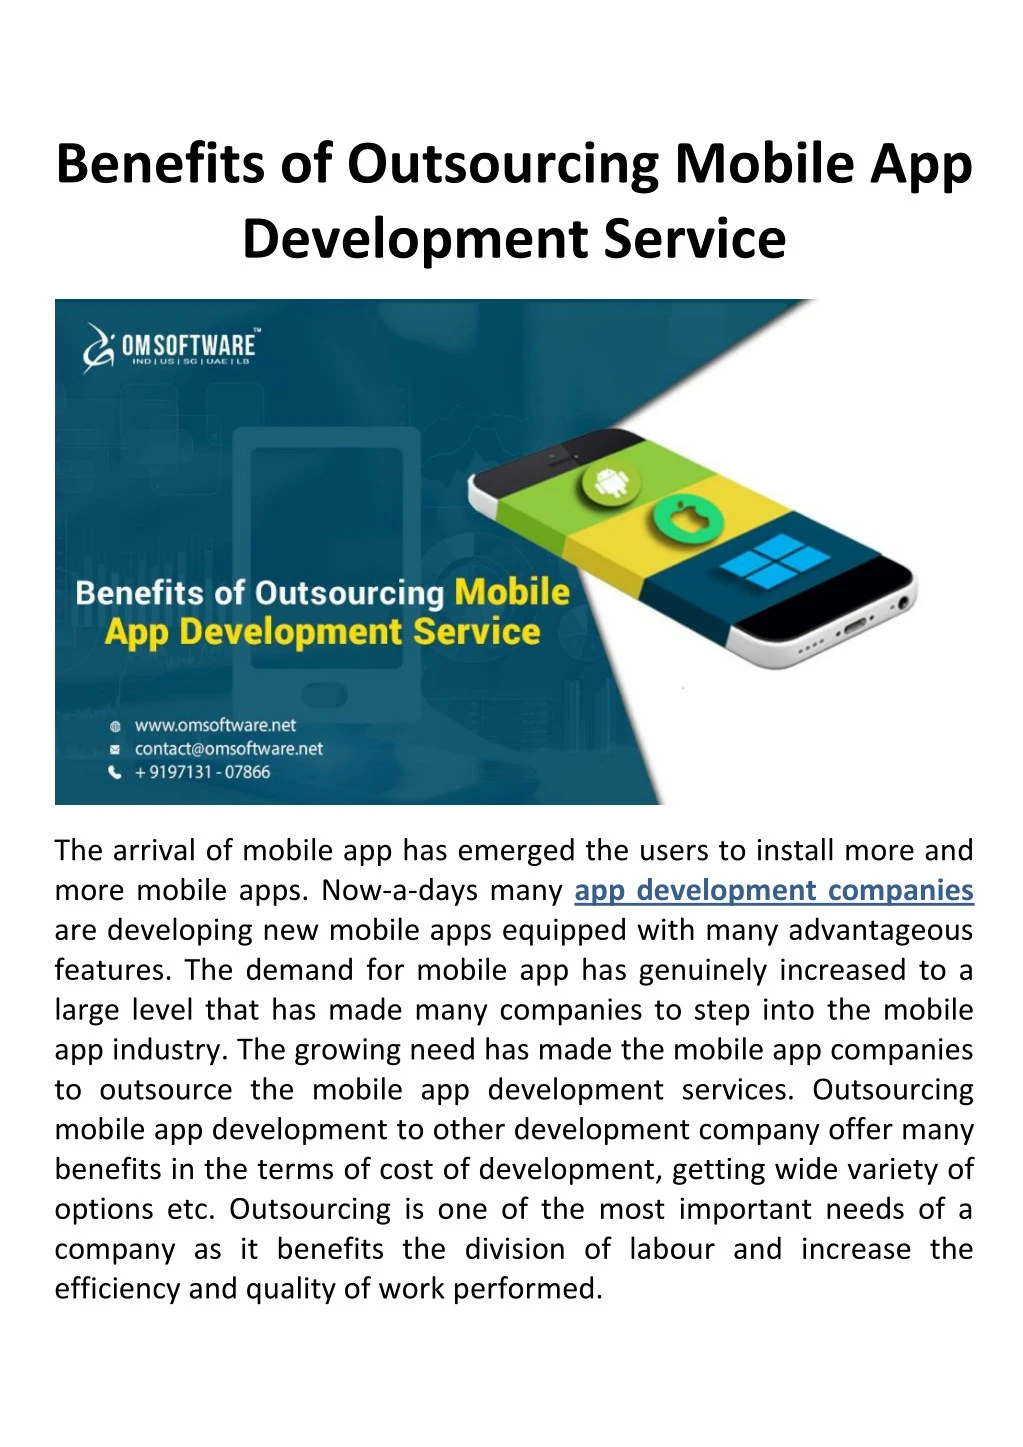 benefits of outsourcing mobile app development